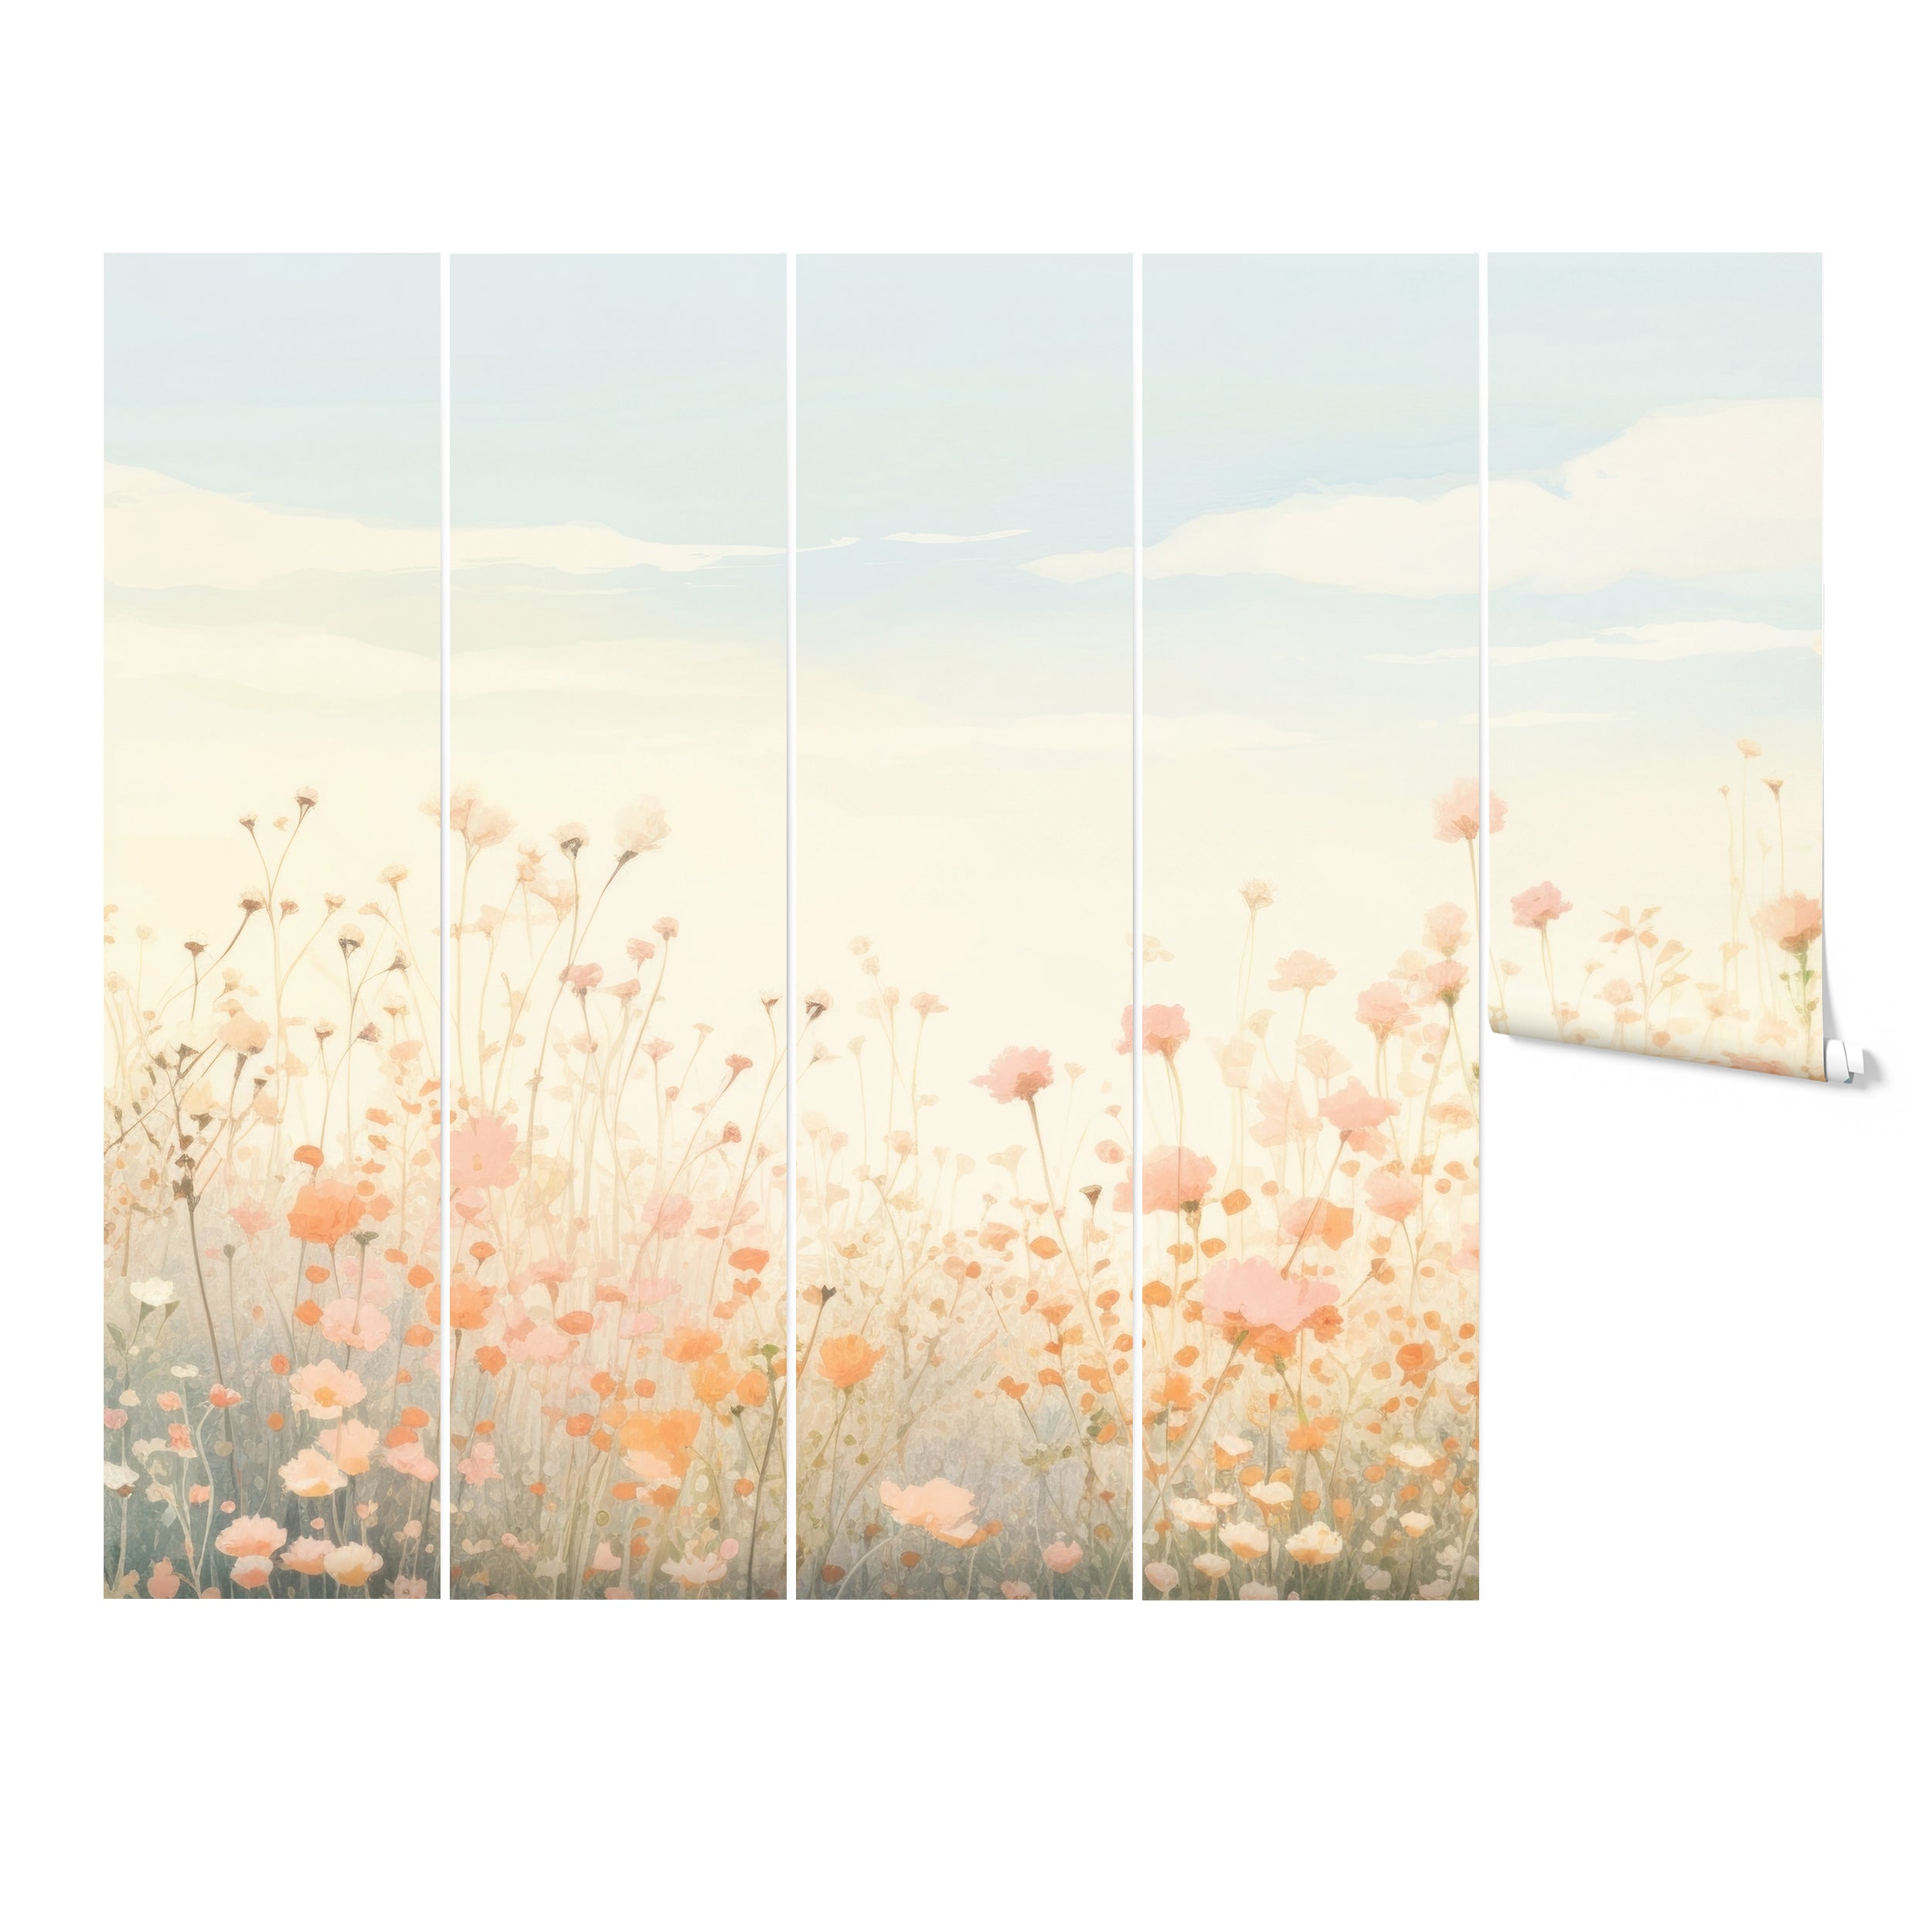 "Packaged rolls of wildflower meadow wallpaper mural featuring floral and pastel designs."